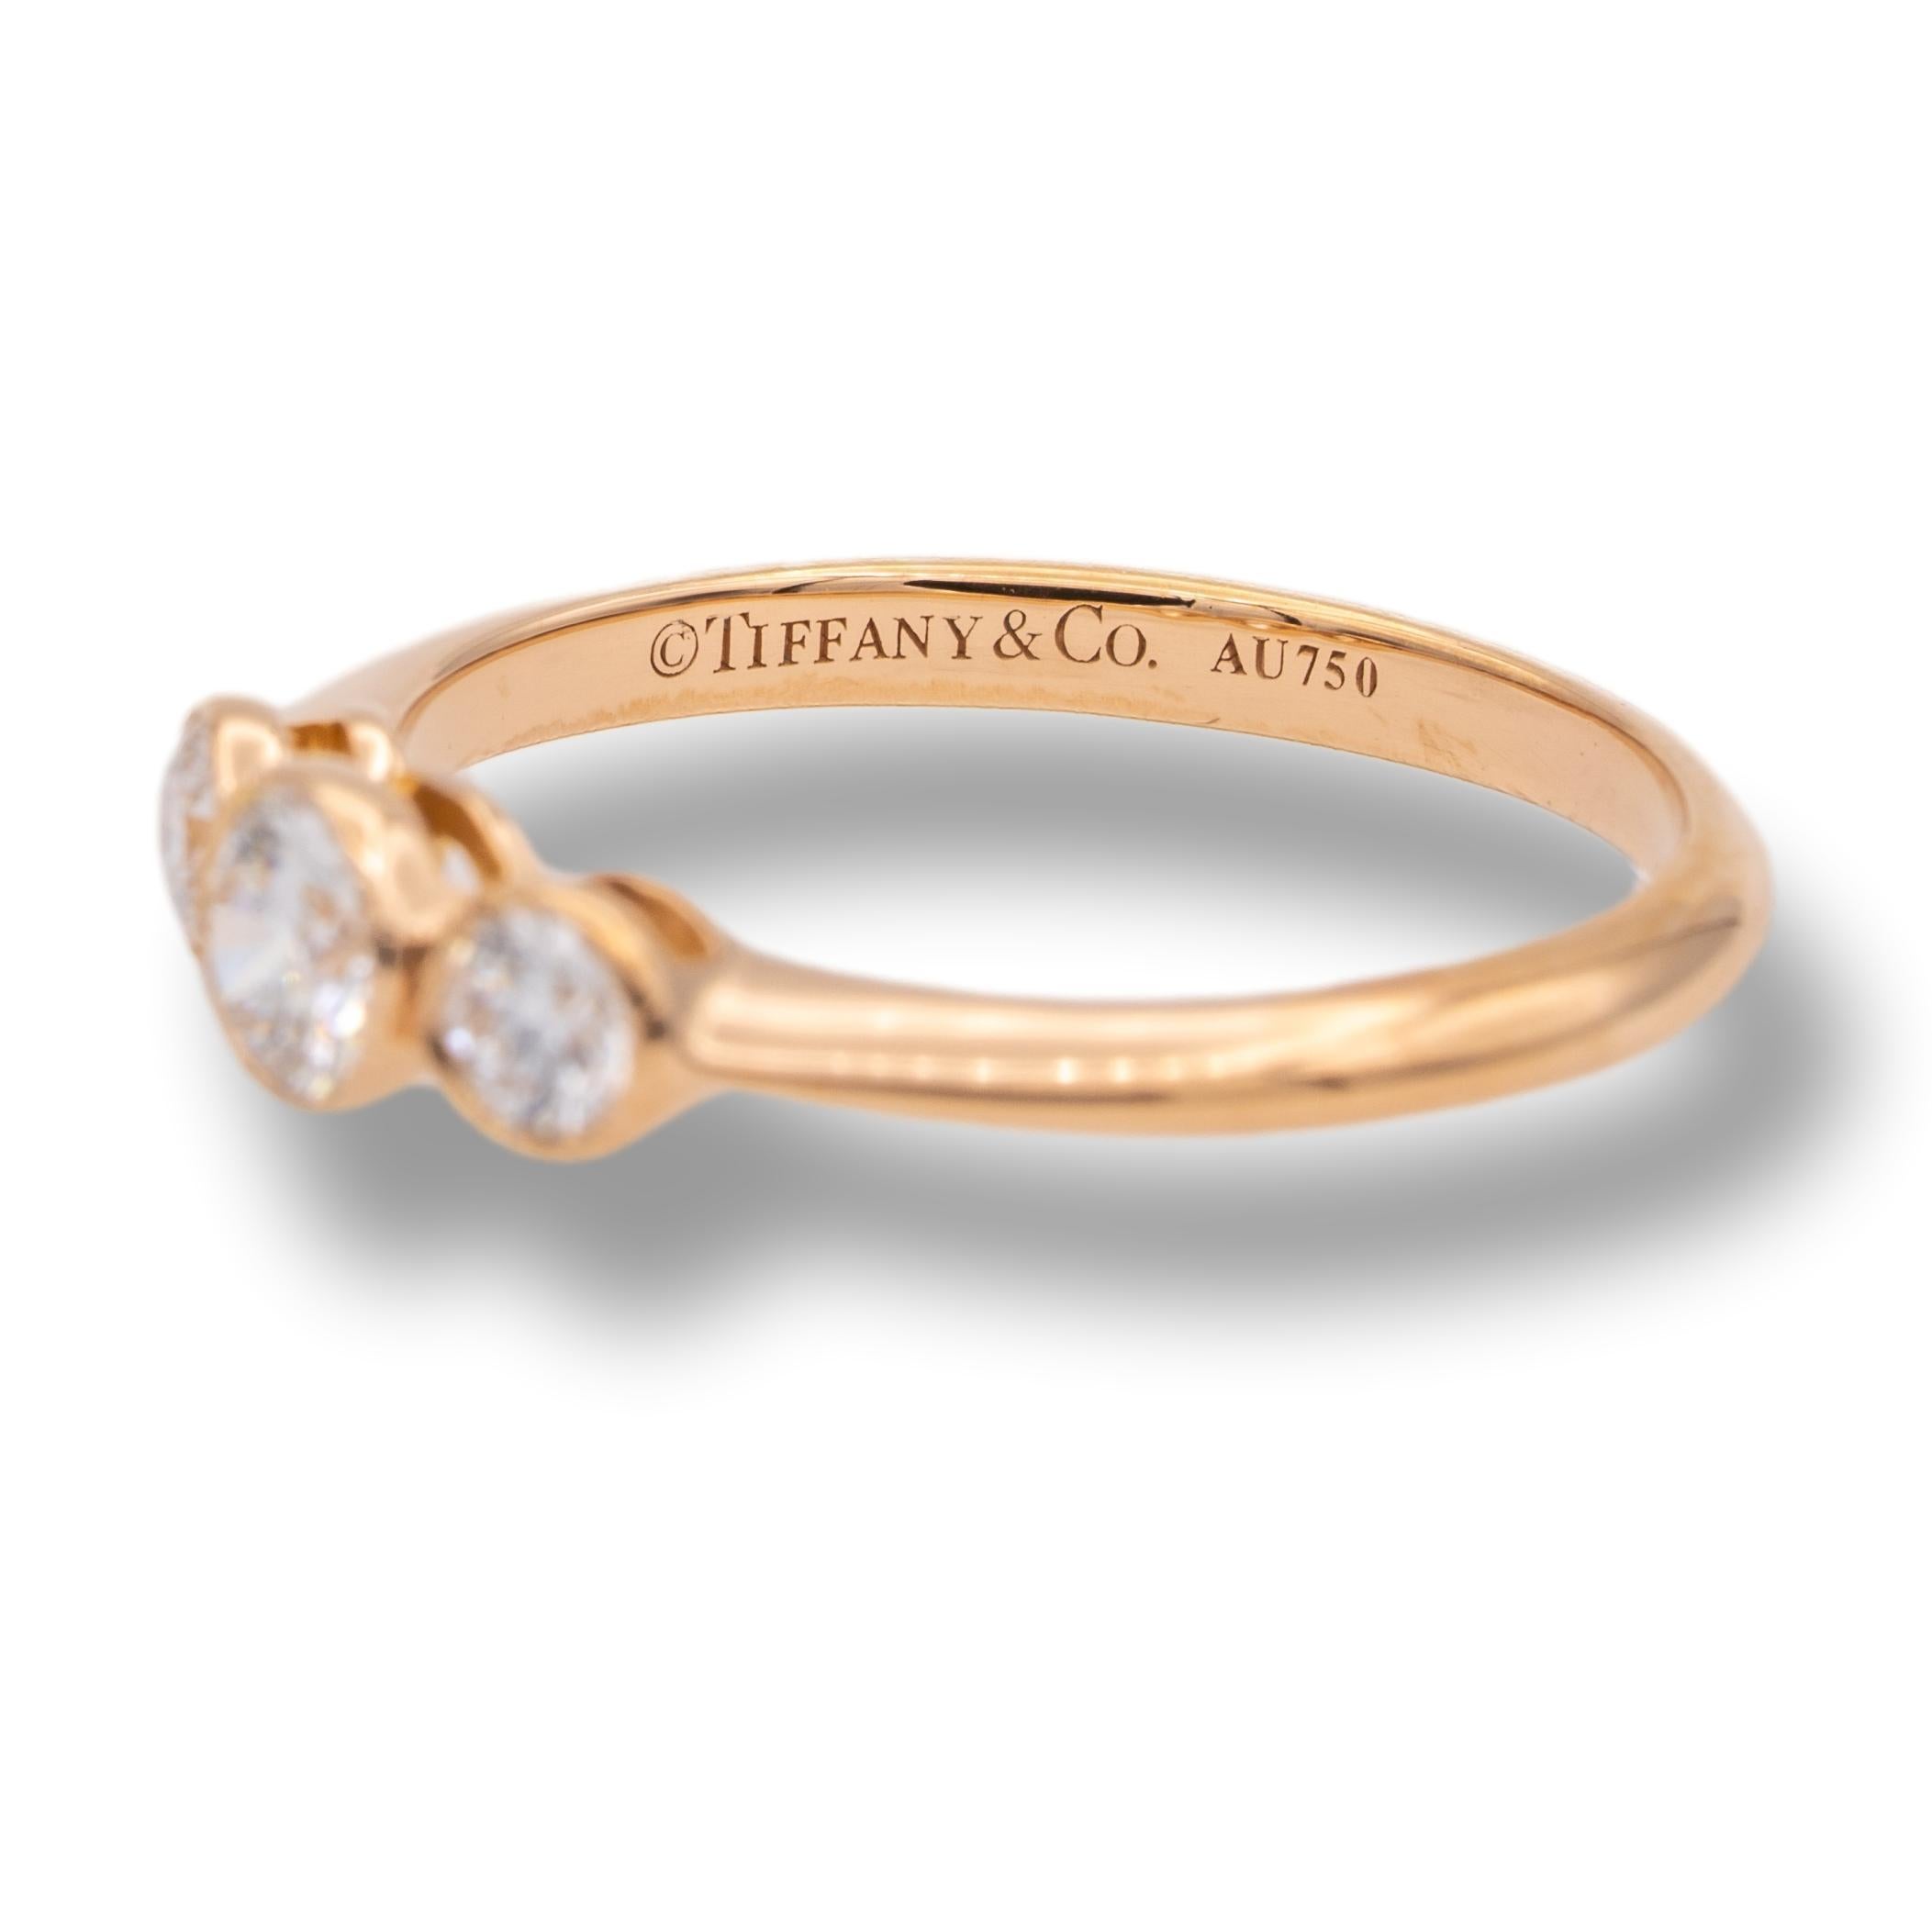 Tiffany & Co. 3 stone ring finely crafted in 18 karat rose gold with 3 round brilliant cut diamonds set in bezels with mill-grain edges. The diamonds weigh a total of 0.29 carats total weight, G color VVS2 clarity.

 

Brand: Tiffany &